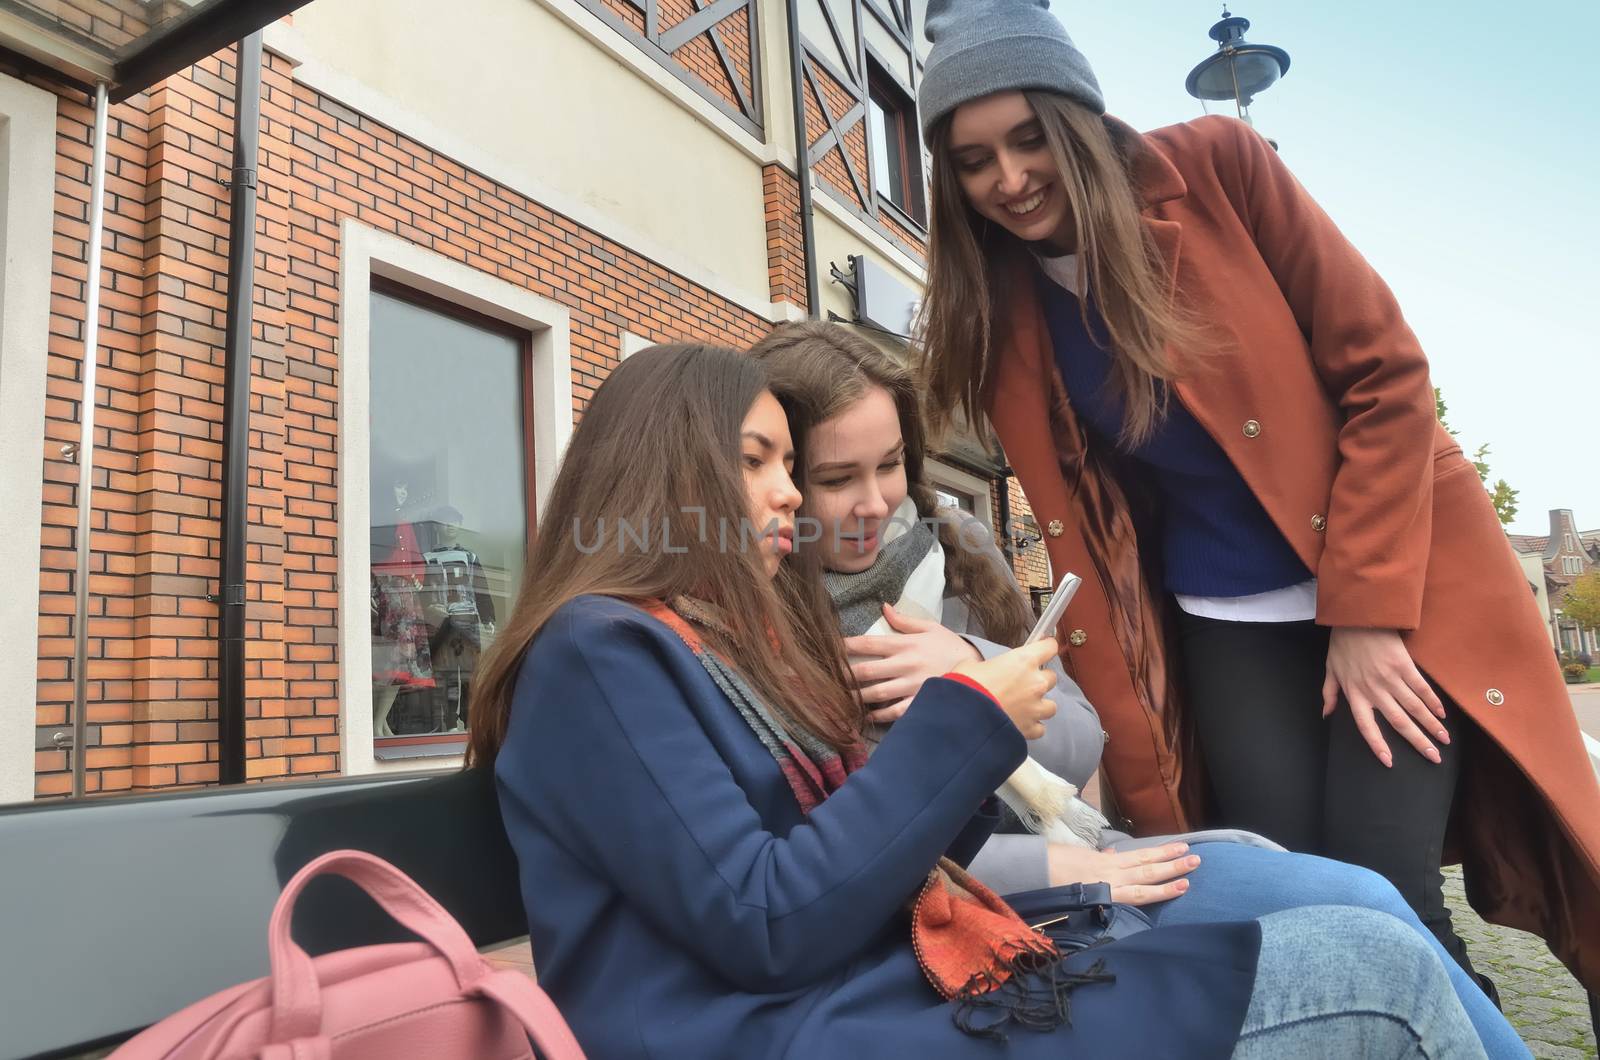 Three girlfriends sit on the bench and comment on the photo on the phone, smiling